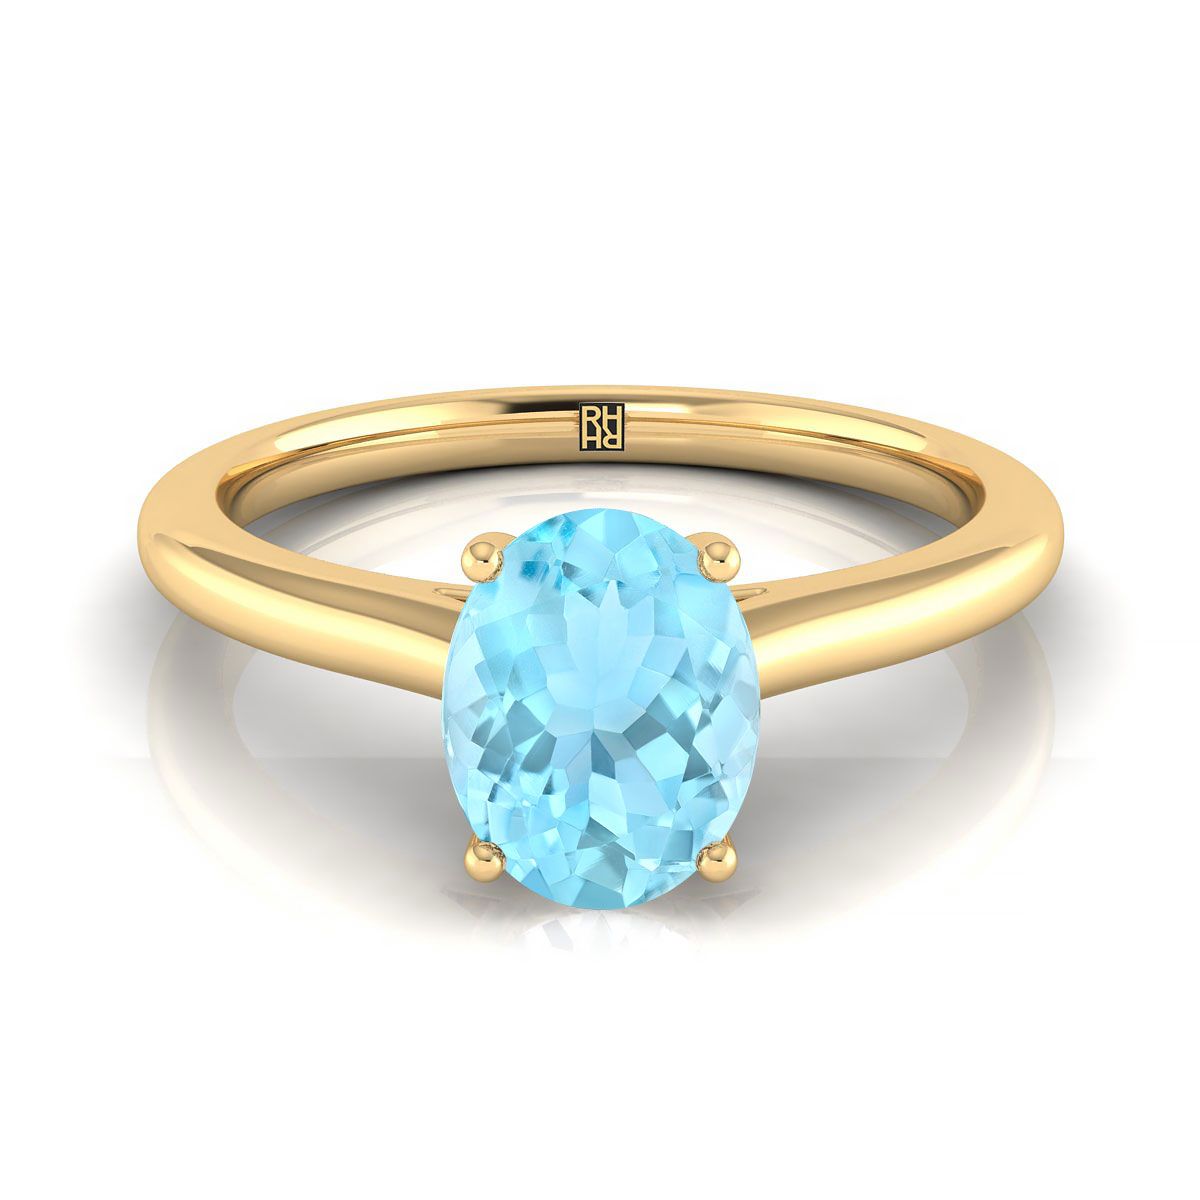 18K Yellow Gold Oval Aquamarine Pinched Comfort Fit Claw Prong Solitaire Engagement Ring